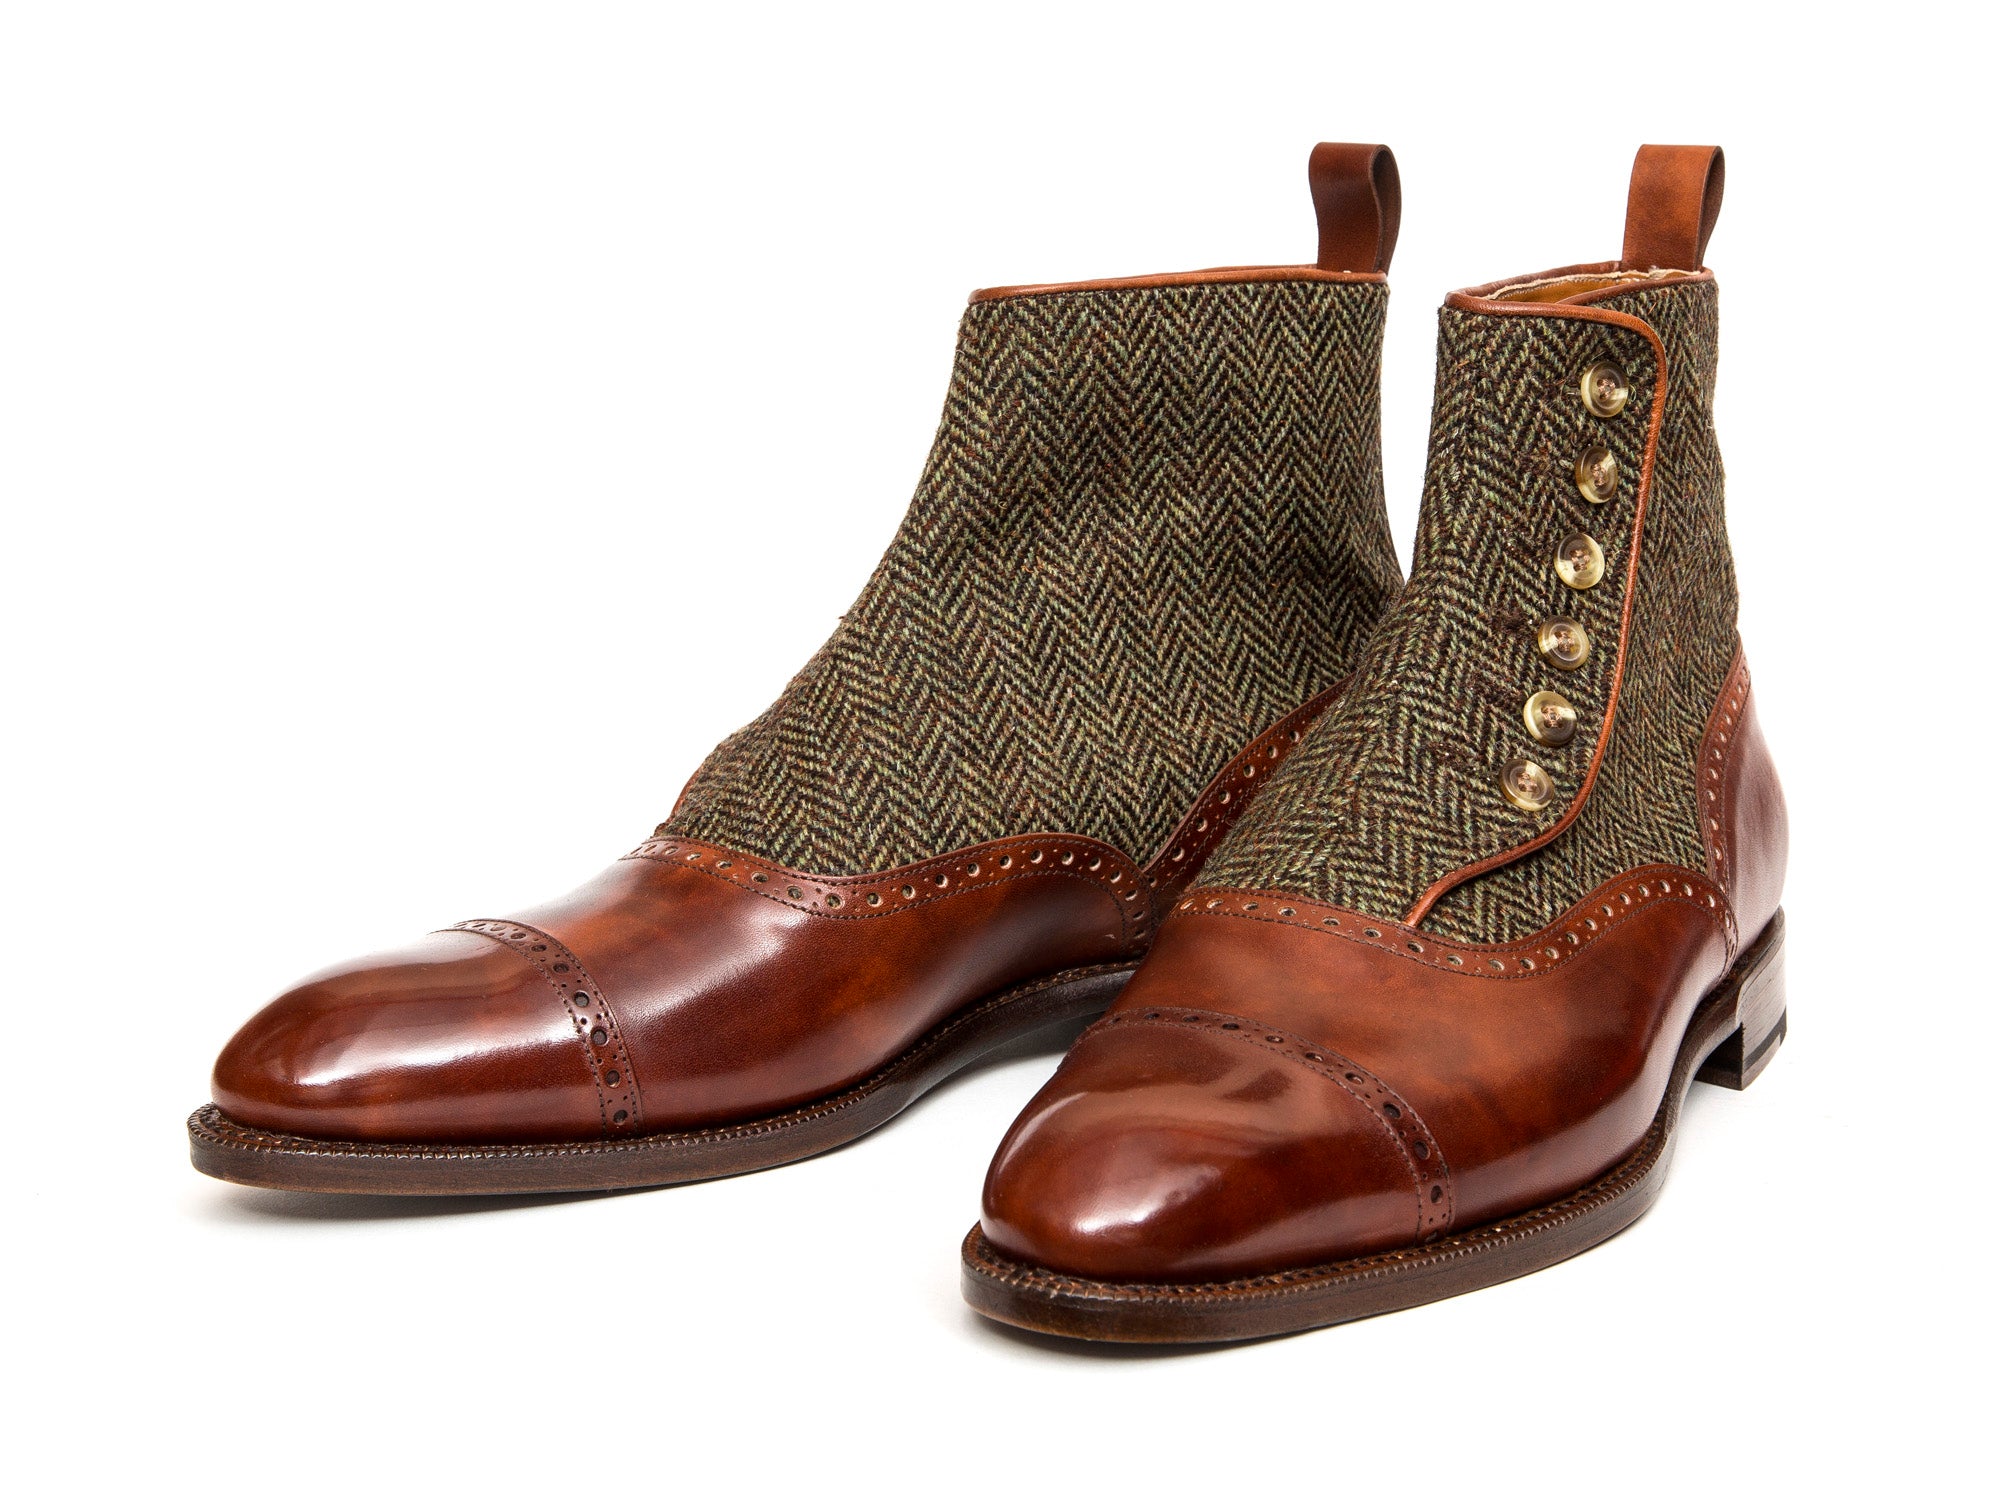 Puyallup - MTO - Gold Museum Calf / Forest Tweed - NGT Last - Single Leather Sole